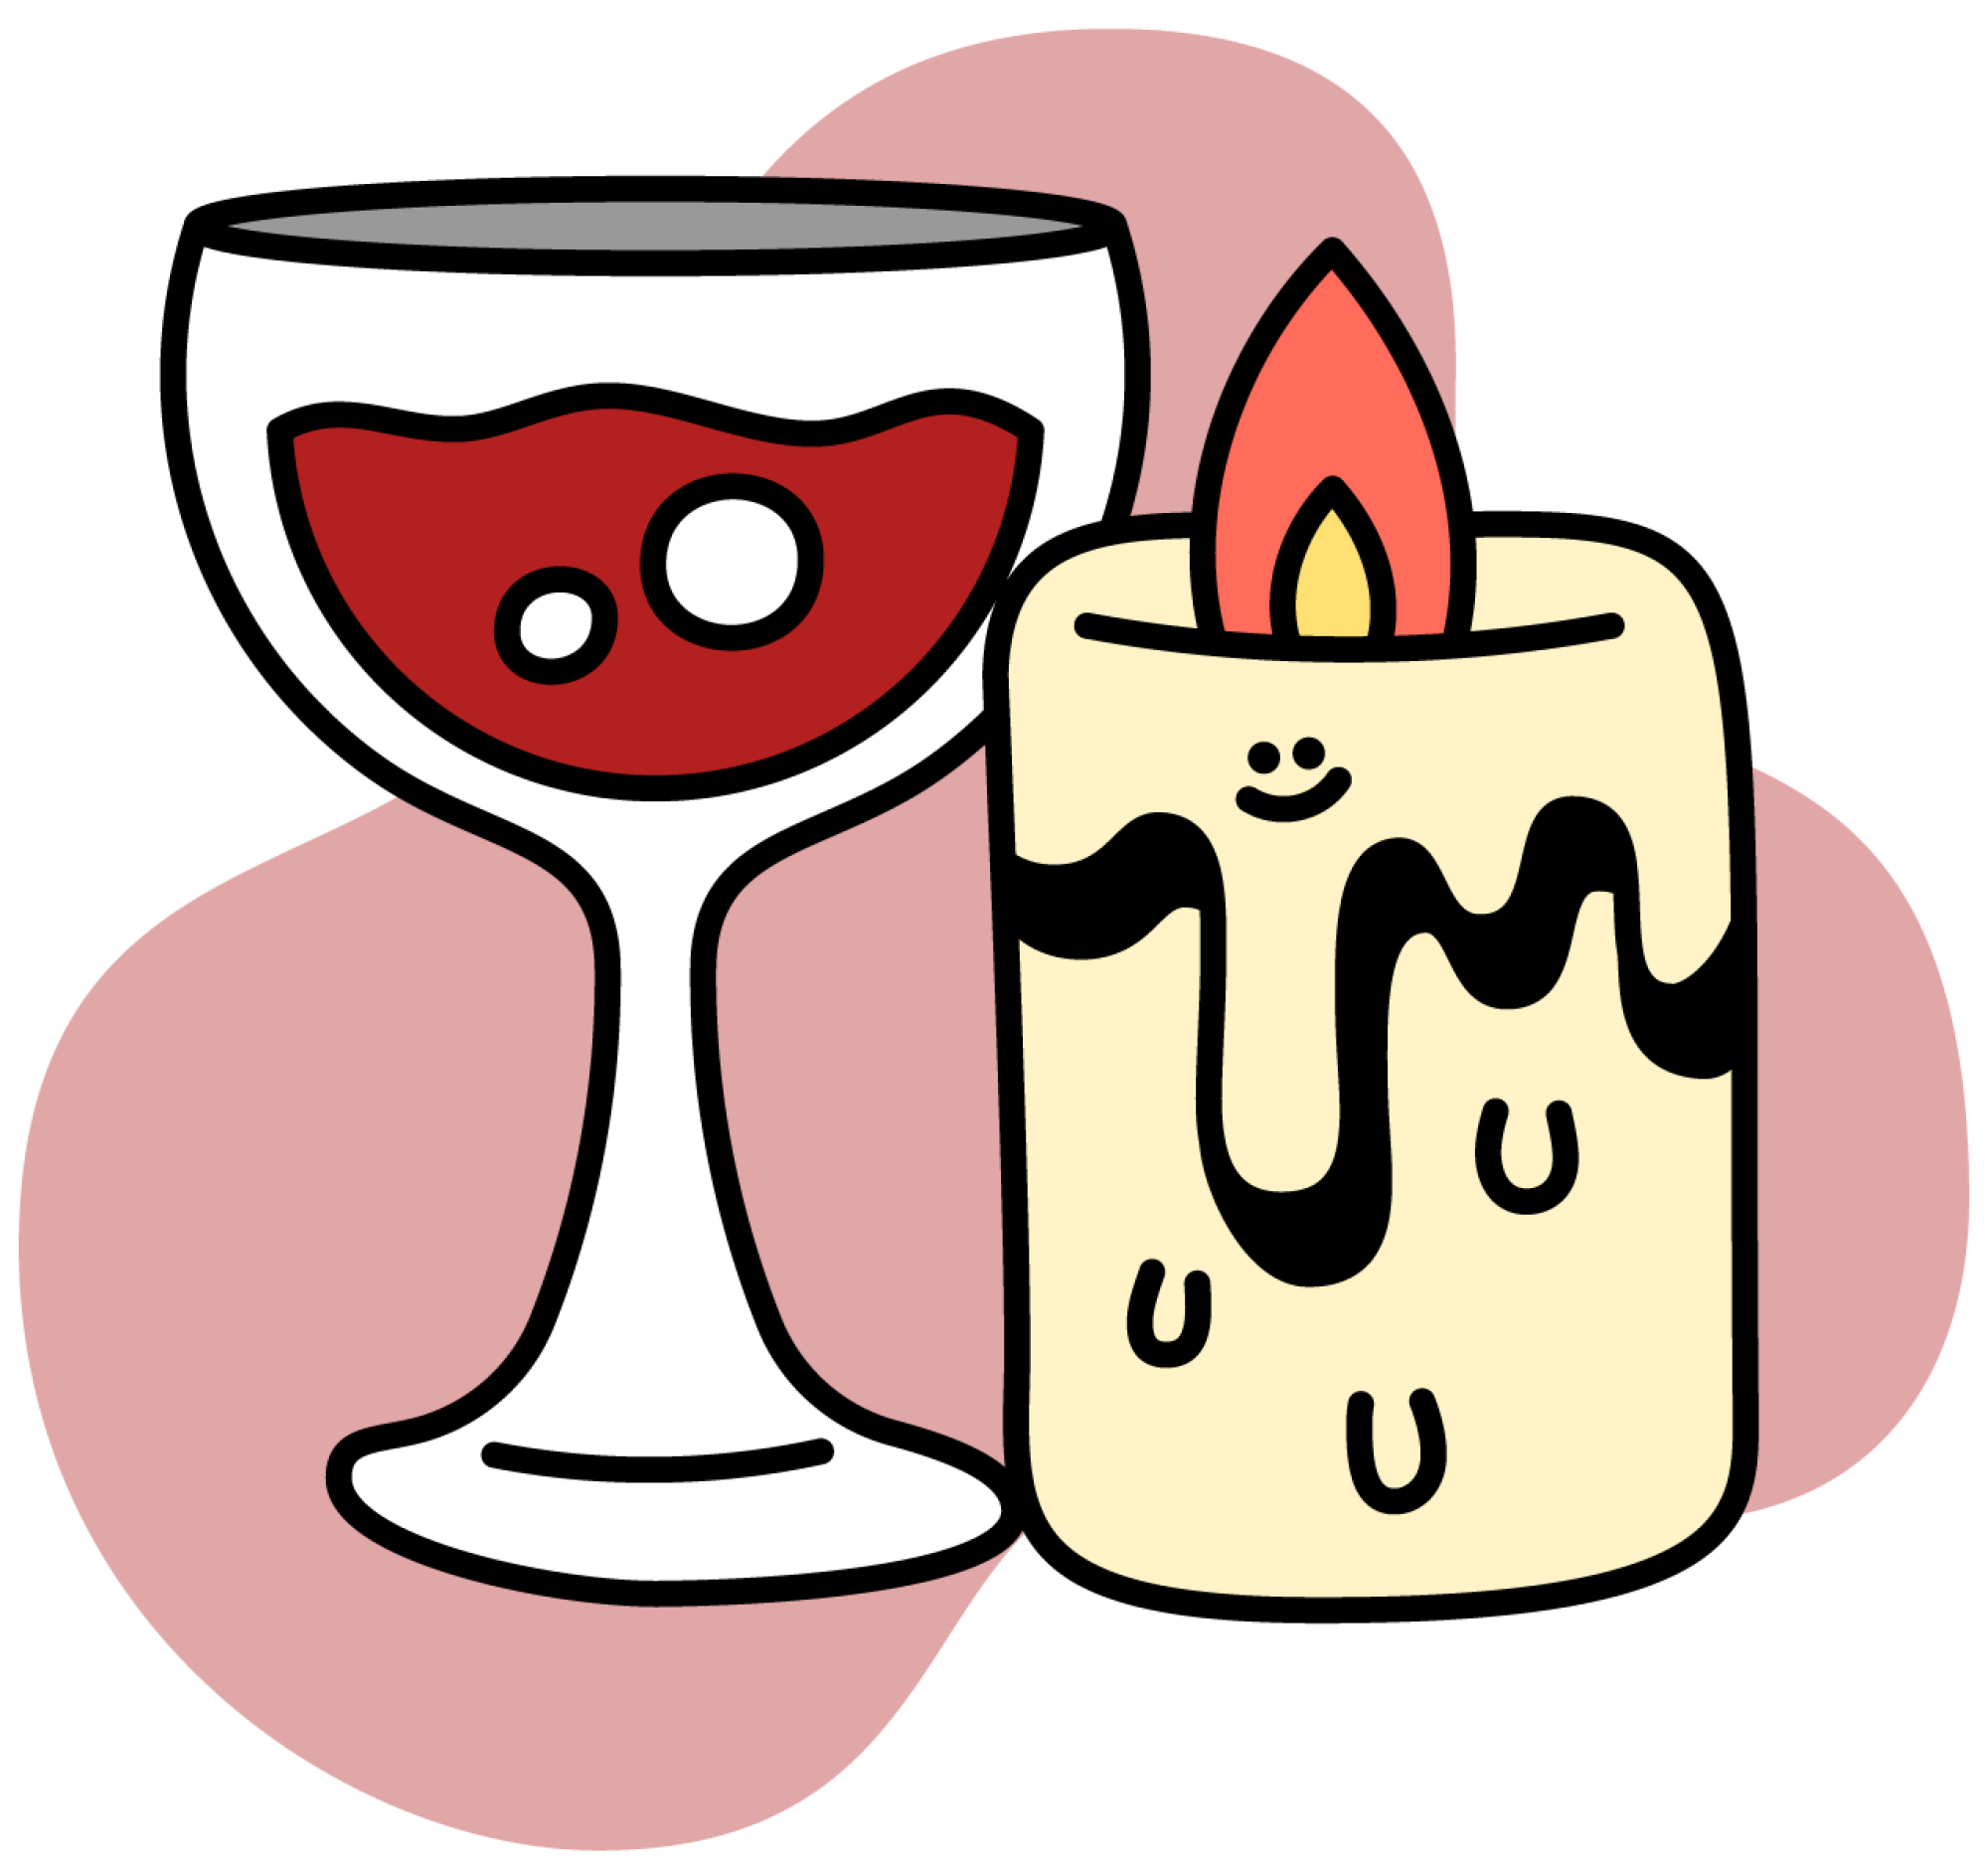 Illustration of a glass of wine and a candle